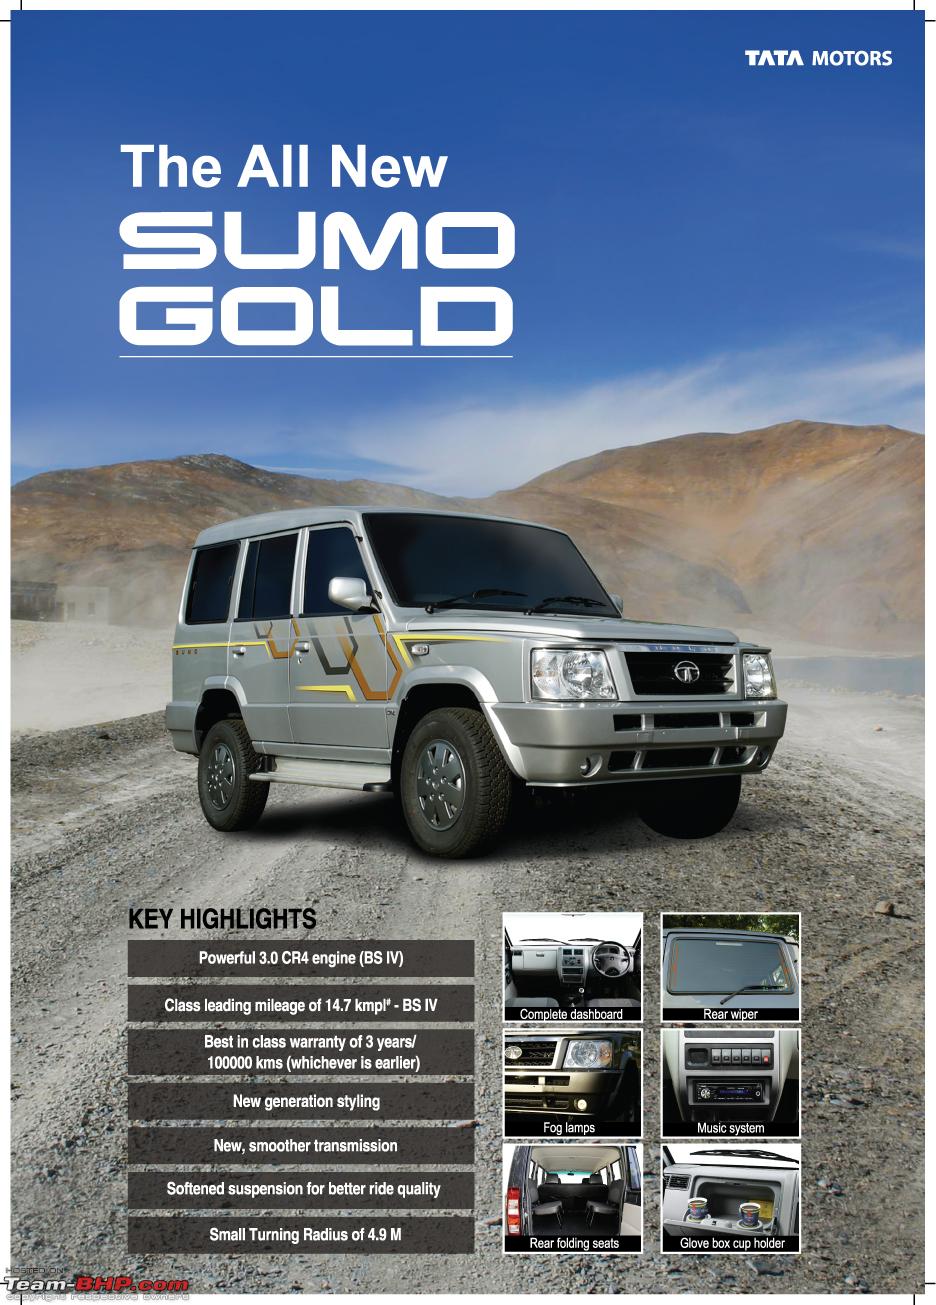 826355d1318516205-tata-sumo-gold-refreshed-sumo-a4-sumo-gold-leaflet-bs3-bs4-f-ai.jpg